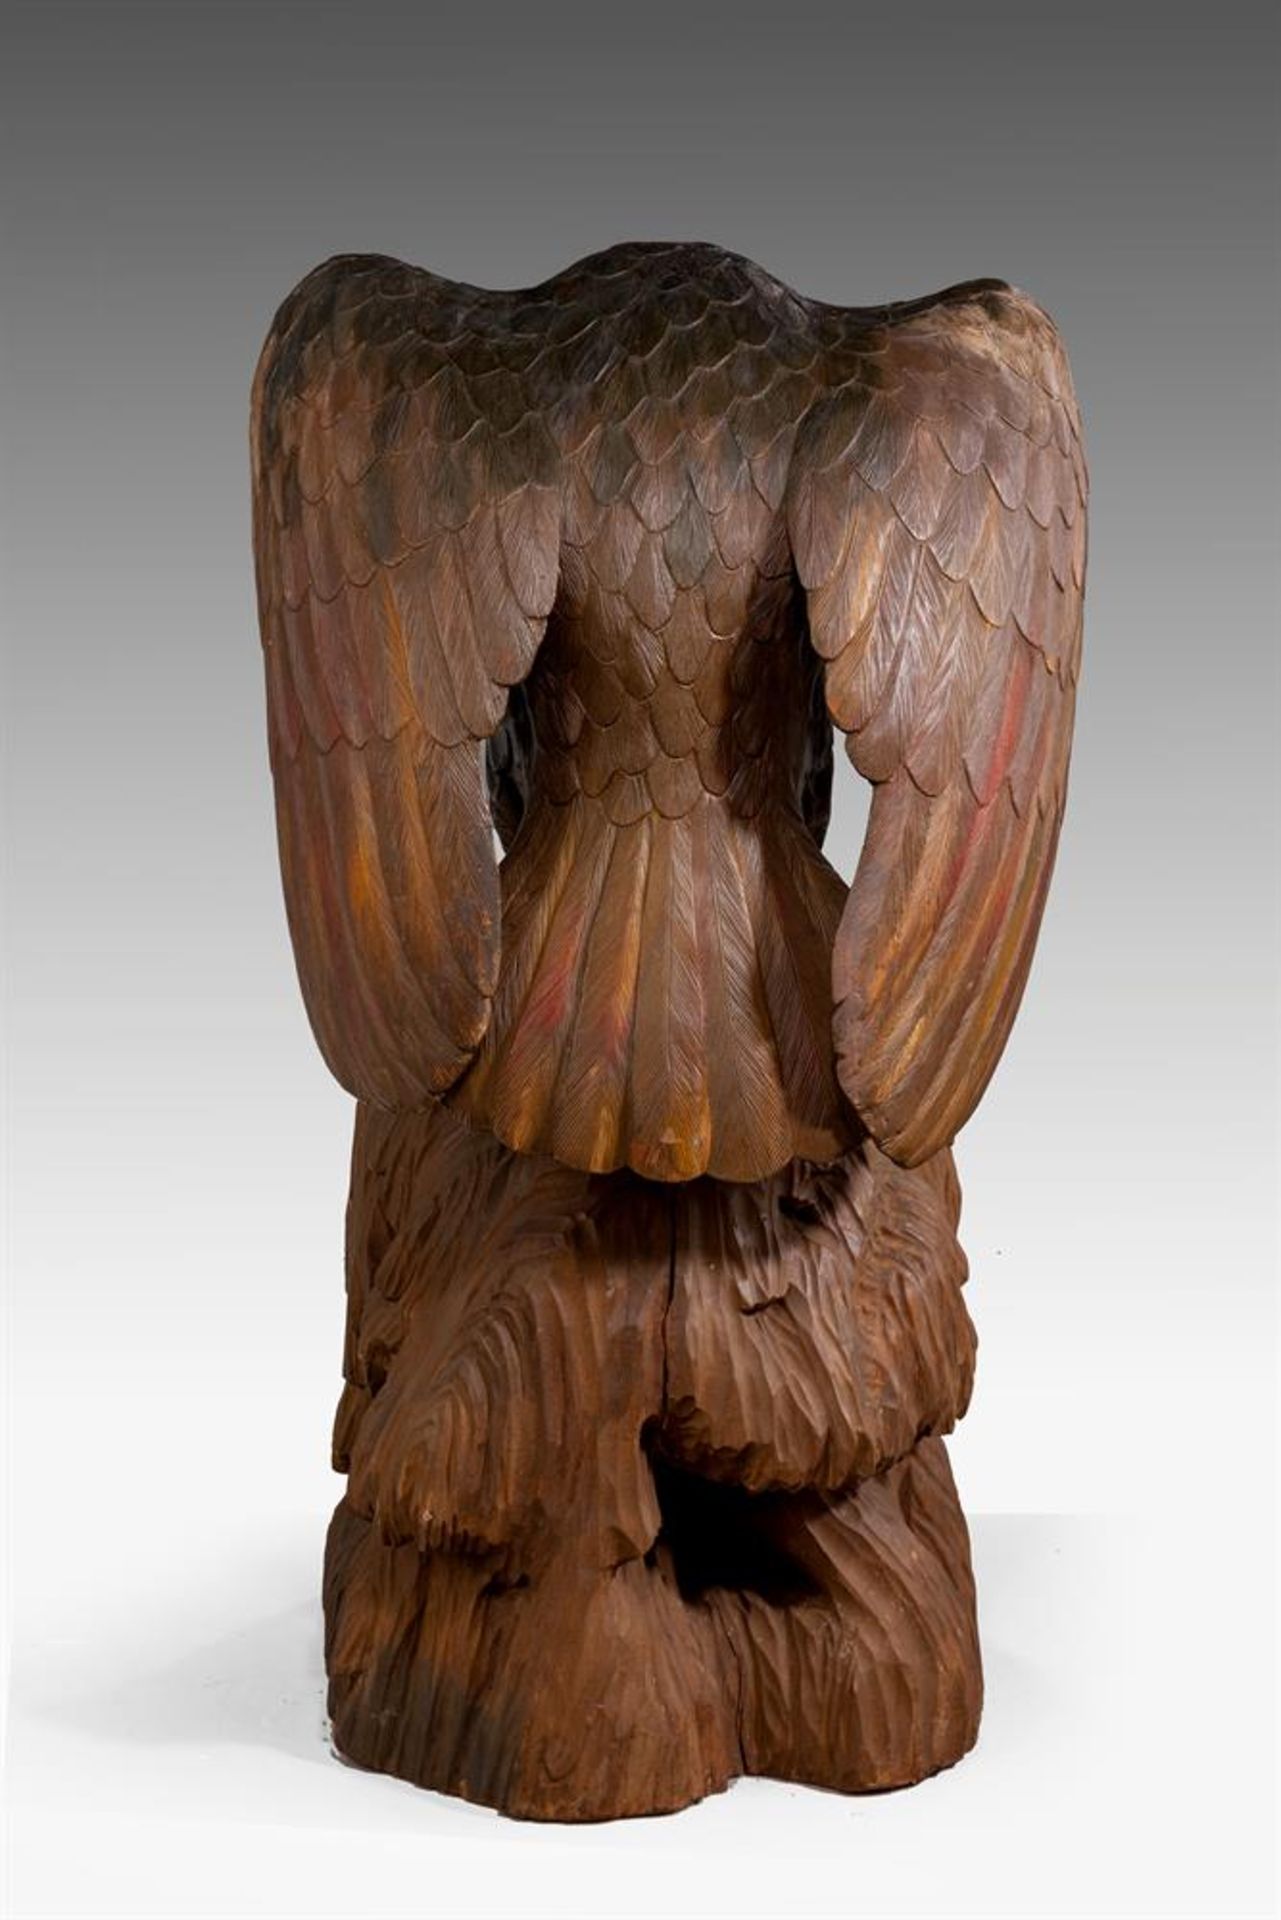 A JAPANESE CARVED WOOD AND PAINTED MODEL OF AN EAGLE, LATE 19TH/EARLY 20TH CENTURY - Image 4 of 5